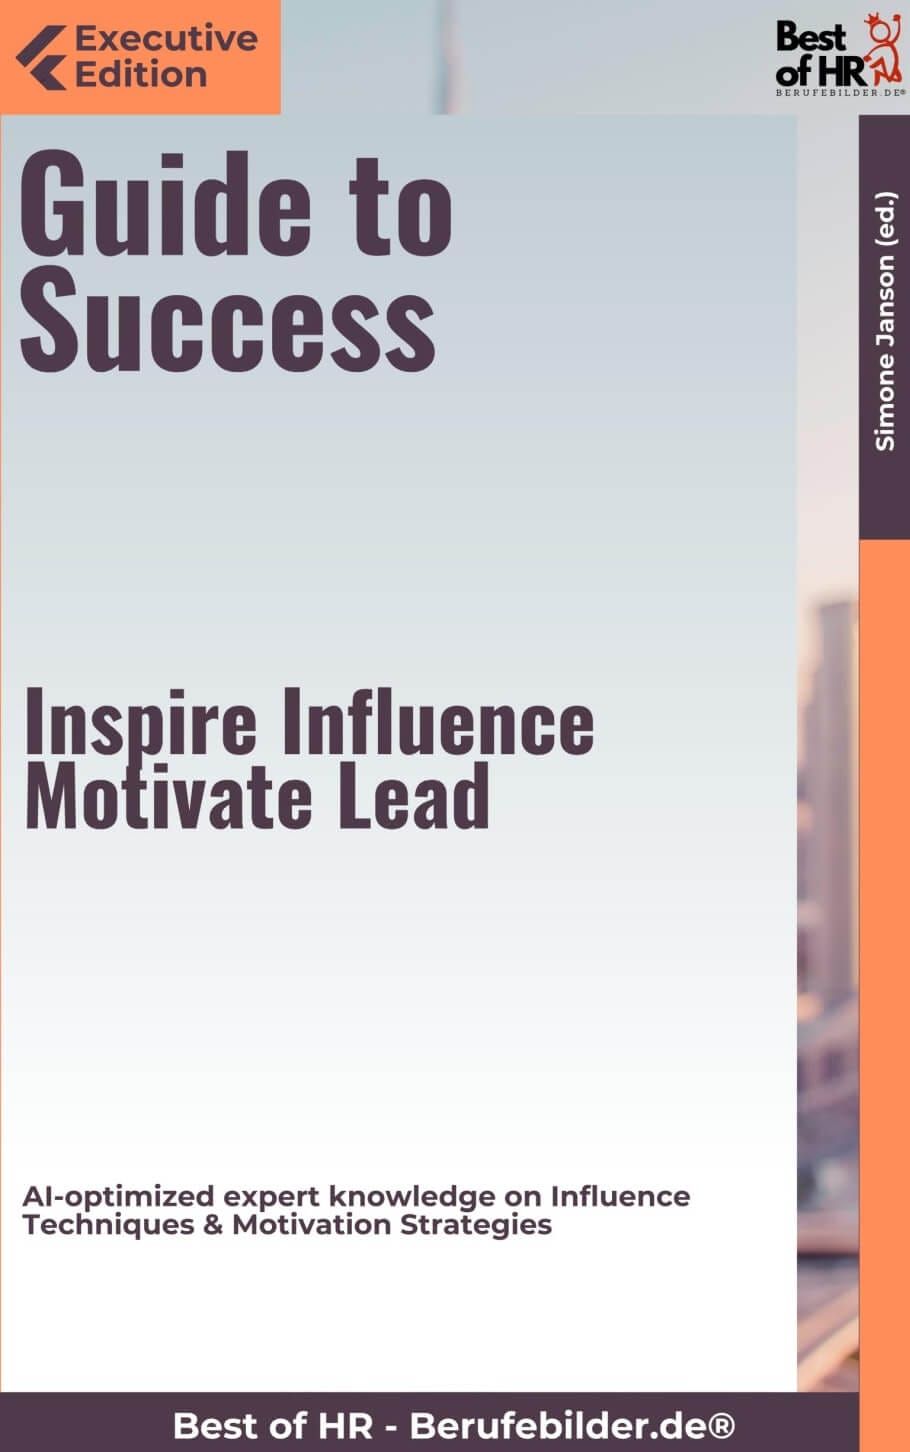 Guide to Success – Inspire, Influence, Motivate, Lead (Engl. Version)